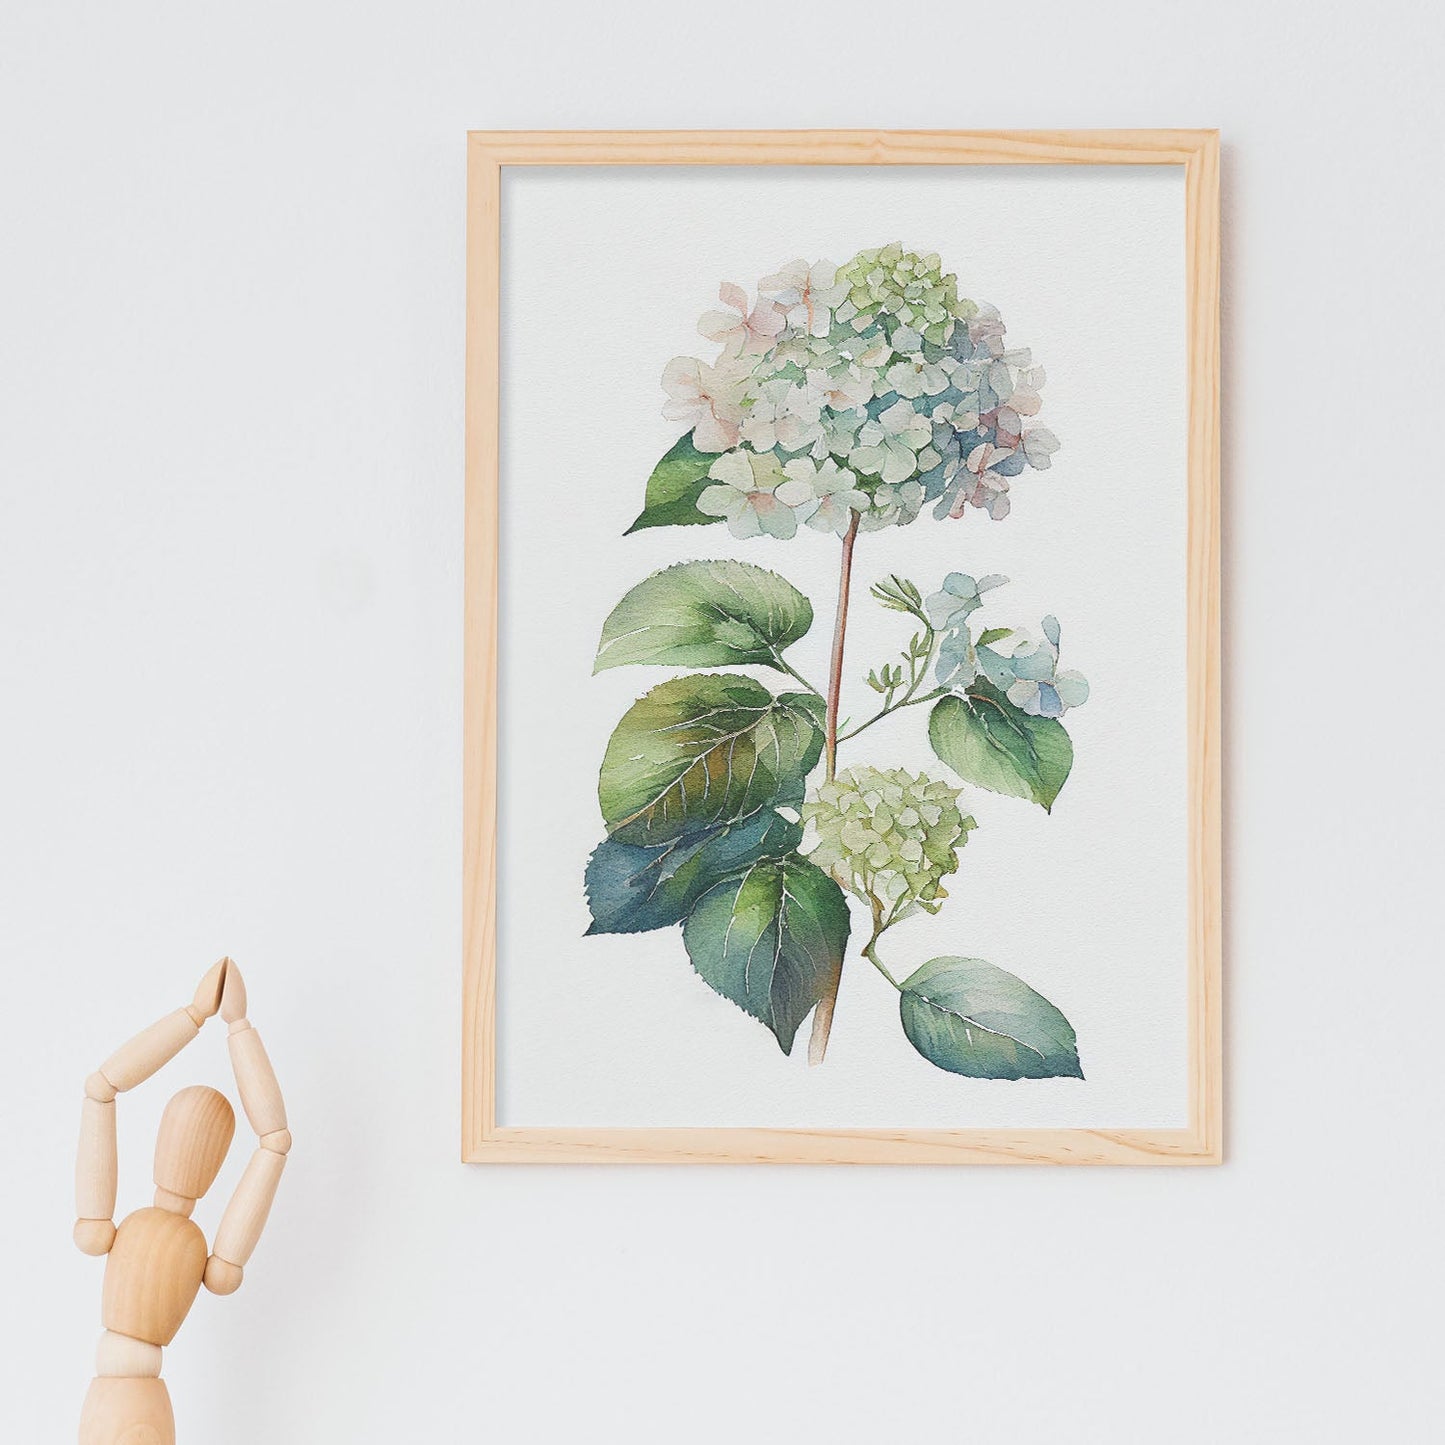 Nacnic watercolor minmal Hydrangea_3. Aesthetic Wall Art Prints for Bedroom or Living Room Design.